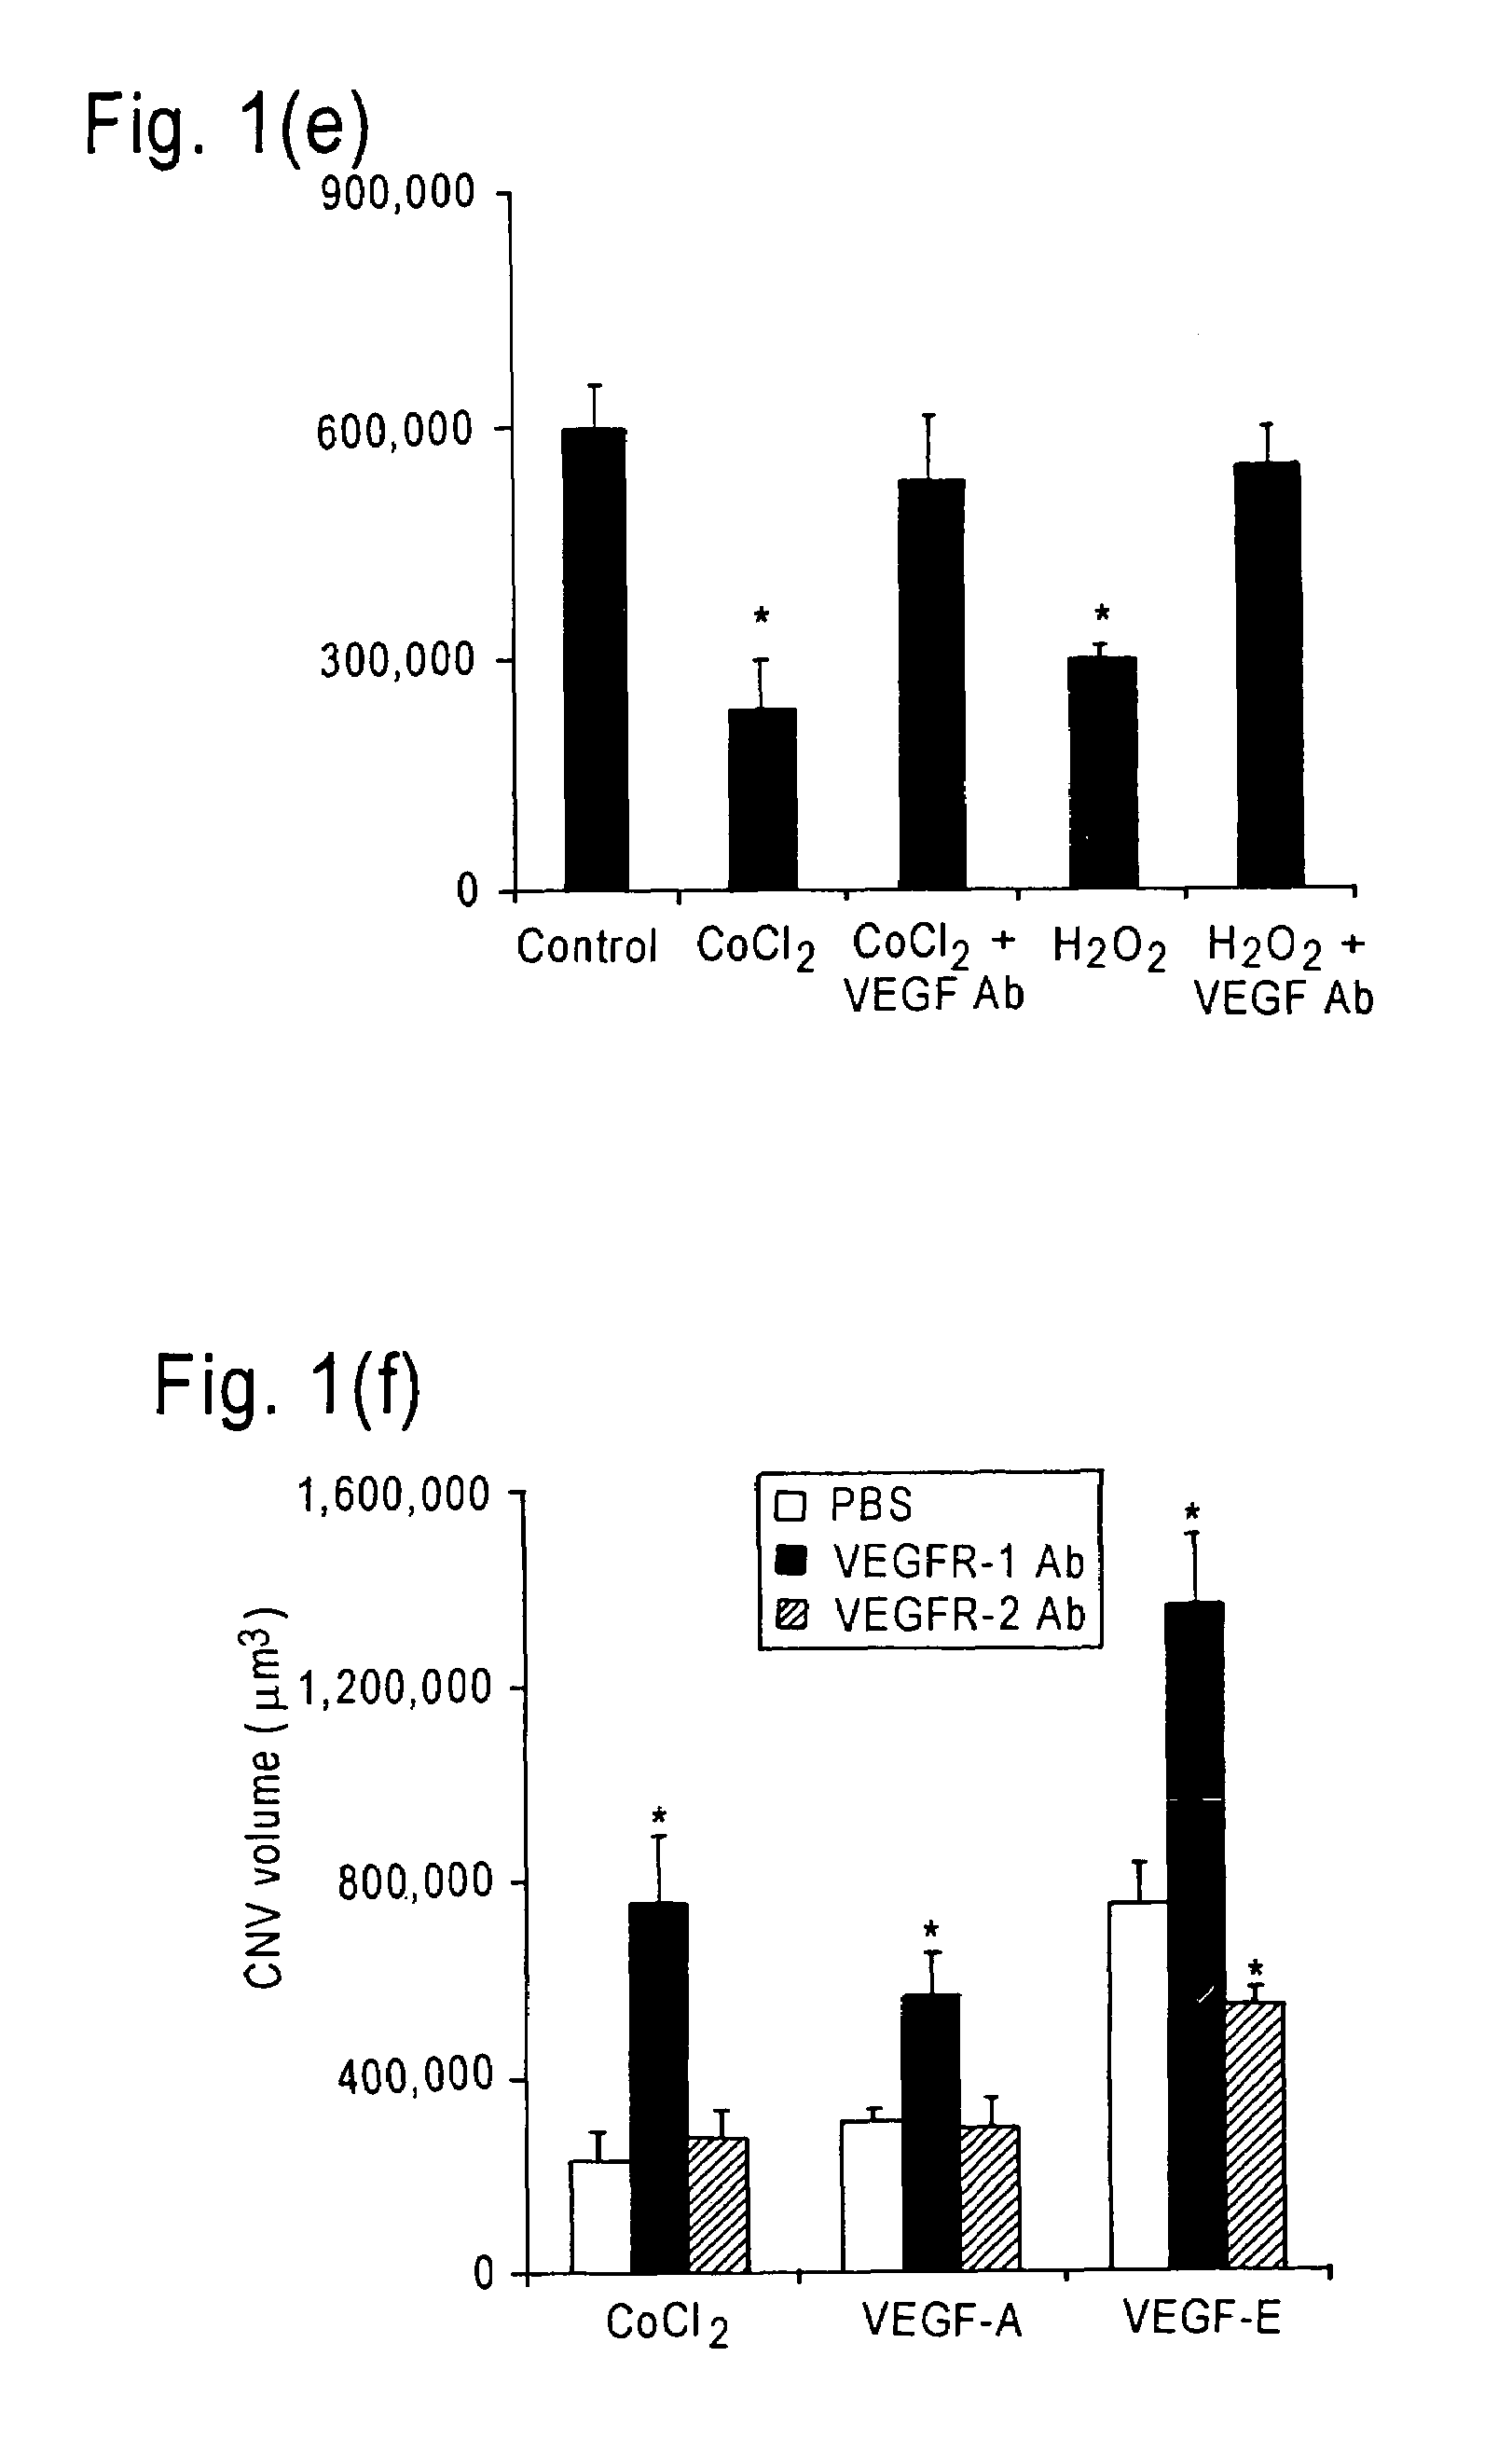 VEGF-A as an inhibitor of angiogenesis and methods of using same